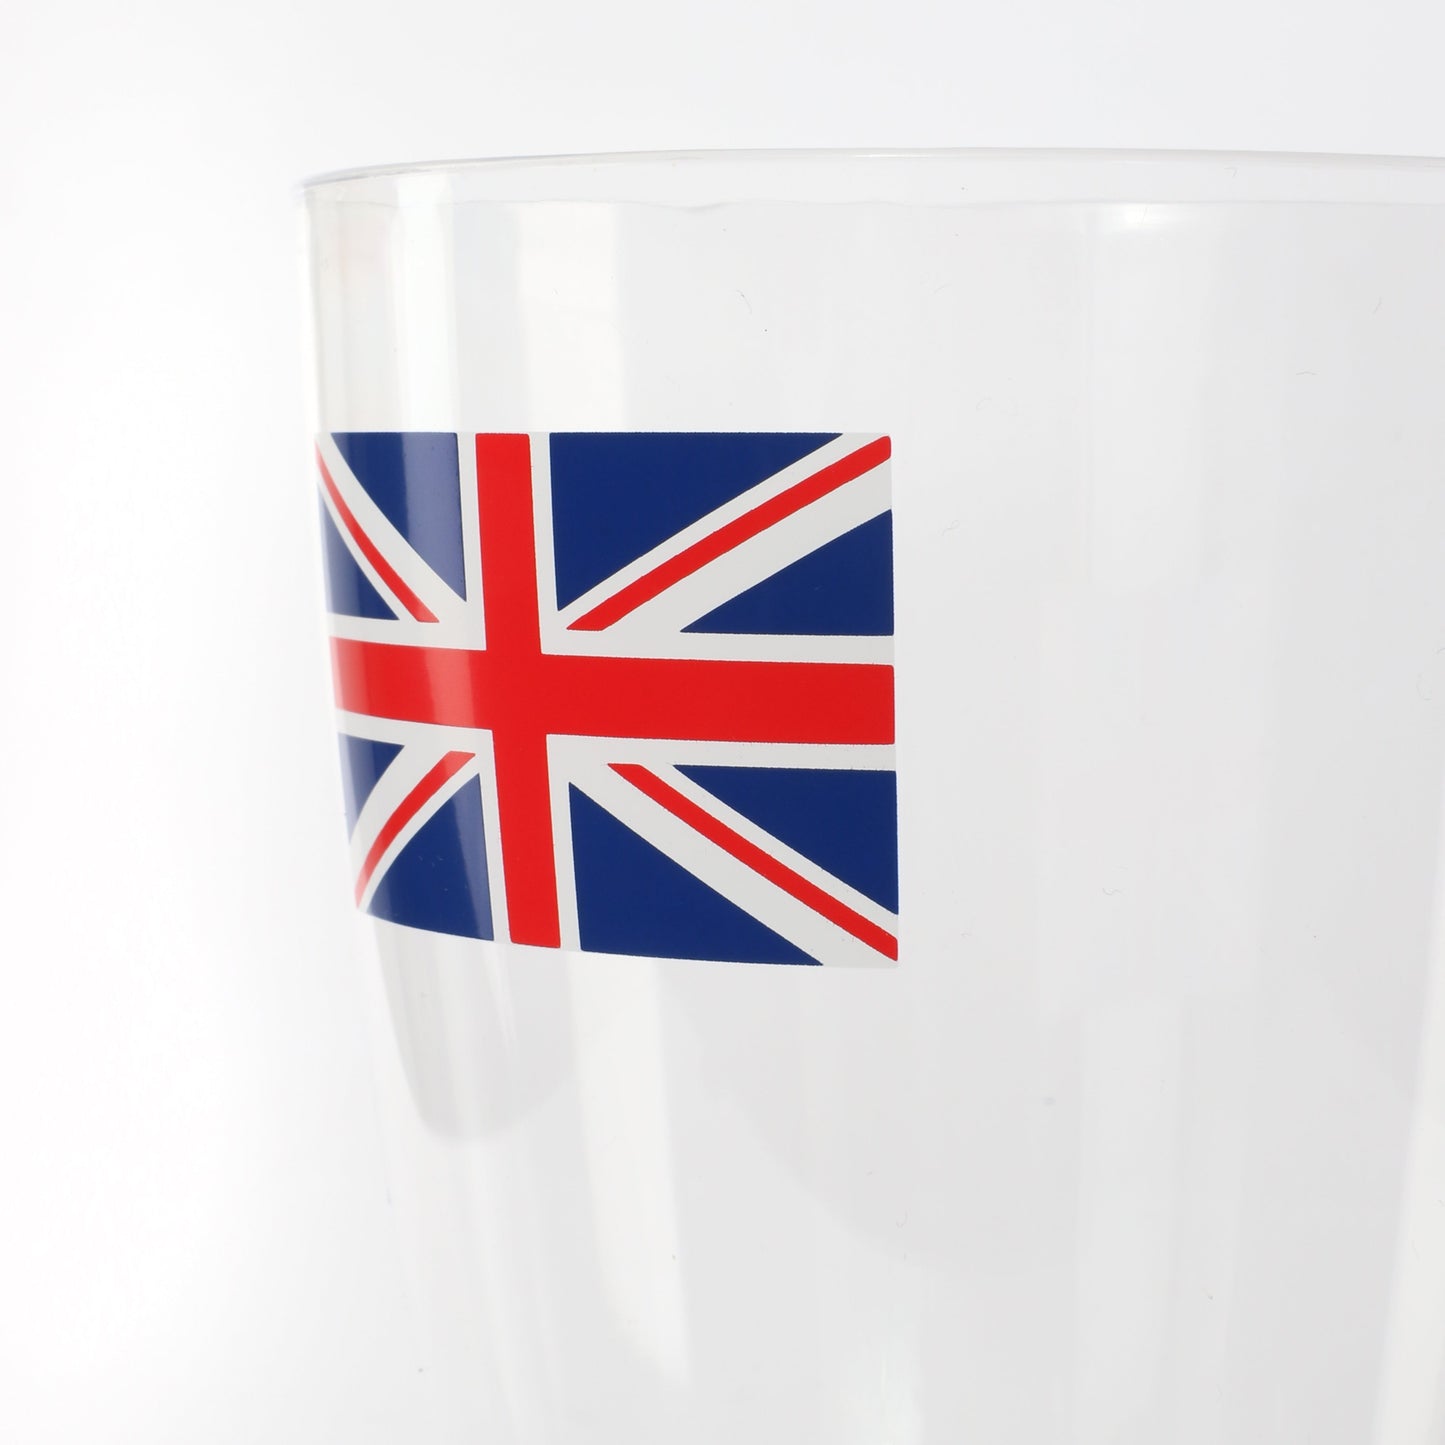 568ml HEAVY DUTY PLASTIC DISPOSABLE UNION JACK PINT CUP IN PACKS 12